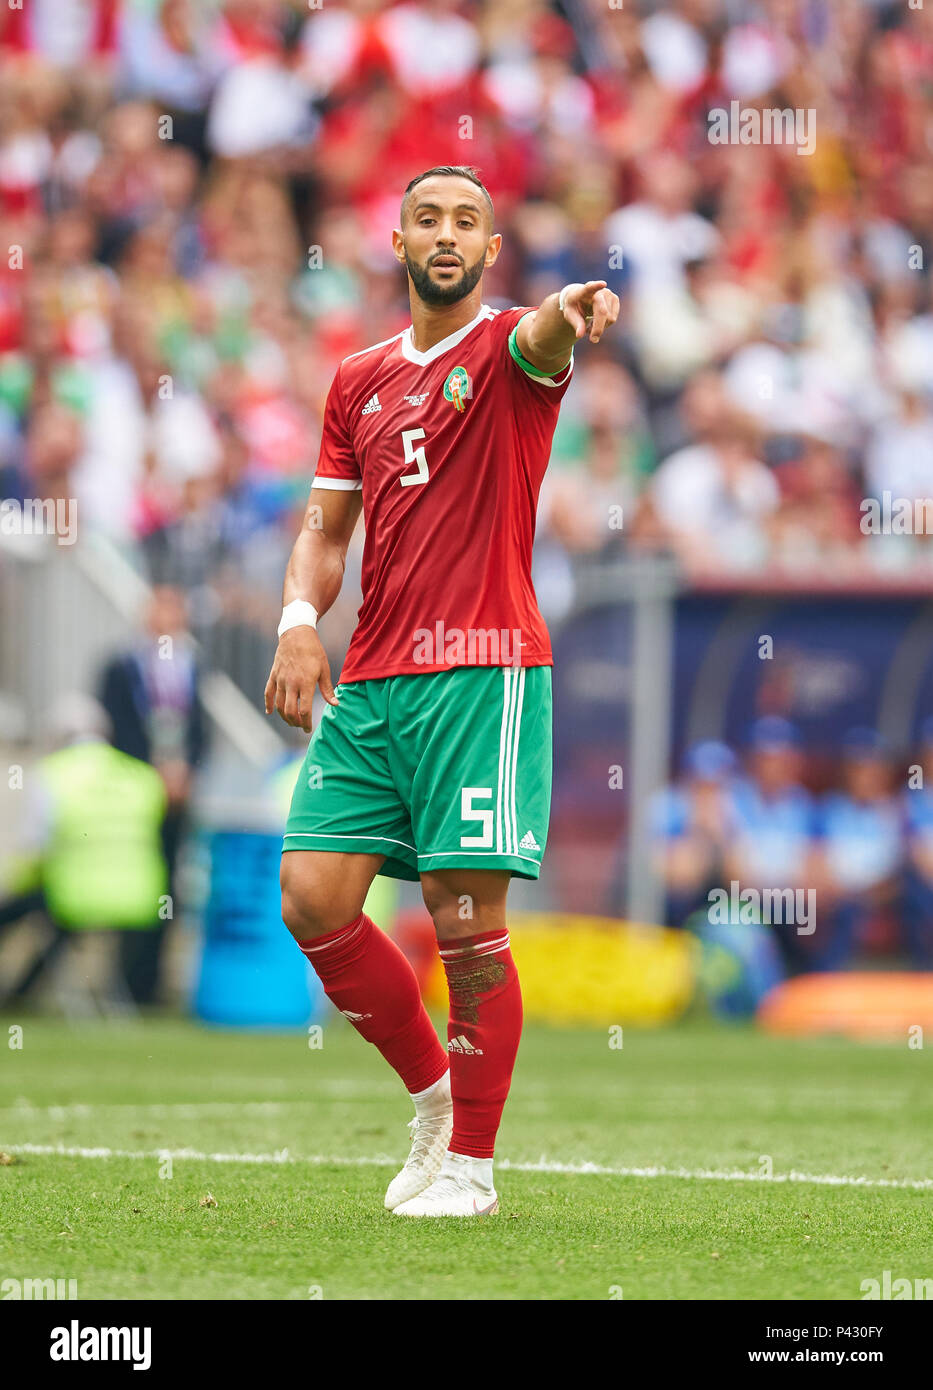 Moscow, Russia. 20th June, 2018. Portugal - Morocco, Soccer, Moscow, June 20, 2018 Mehdi BENATIA, Morocco Nr.5 Gesticulates and giving instructions, action, single image, gesture, gesture, hand movement, pointing, interpret, mimik,  PORTUGAL - MOROCCO 1-0 FIFA WORLD CUP 2018 RUSSIA, Group stage , Season 2018/2019,  June 20, 2018 L u z h n i k i Stadium in Moscow, Russia.  © Peter Schatz / Alamy Live News Credit: Peter Schatz/Alamy Live News Stock Photo